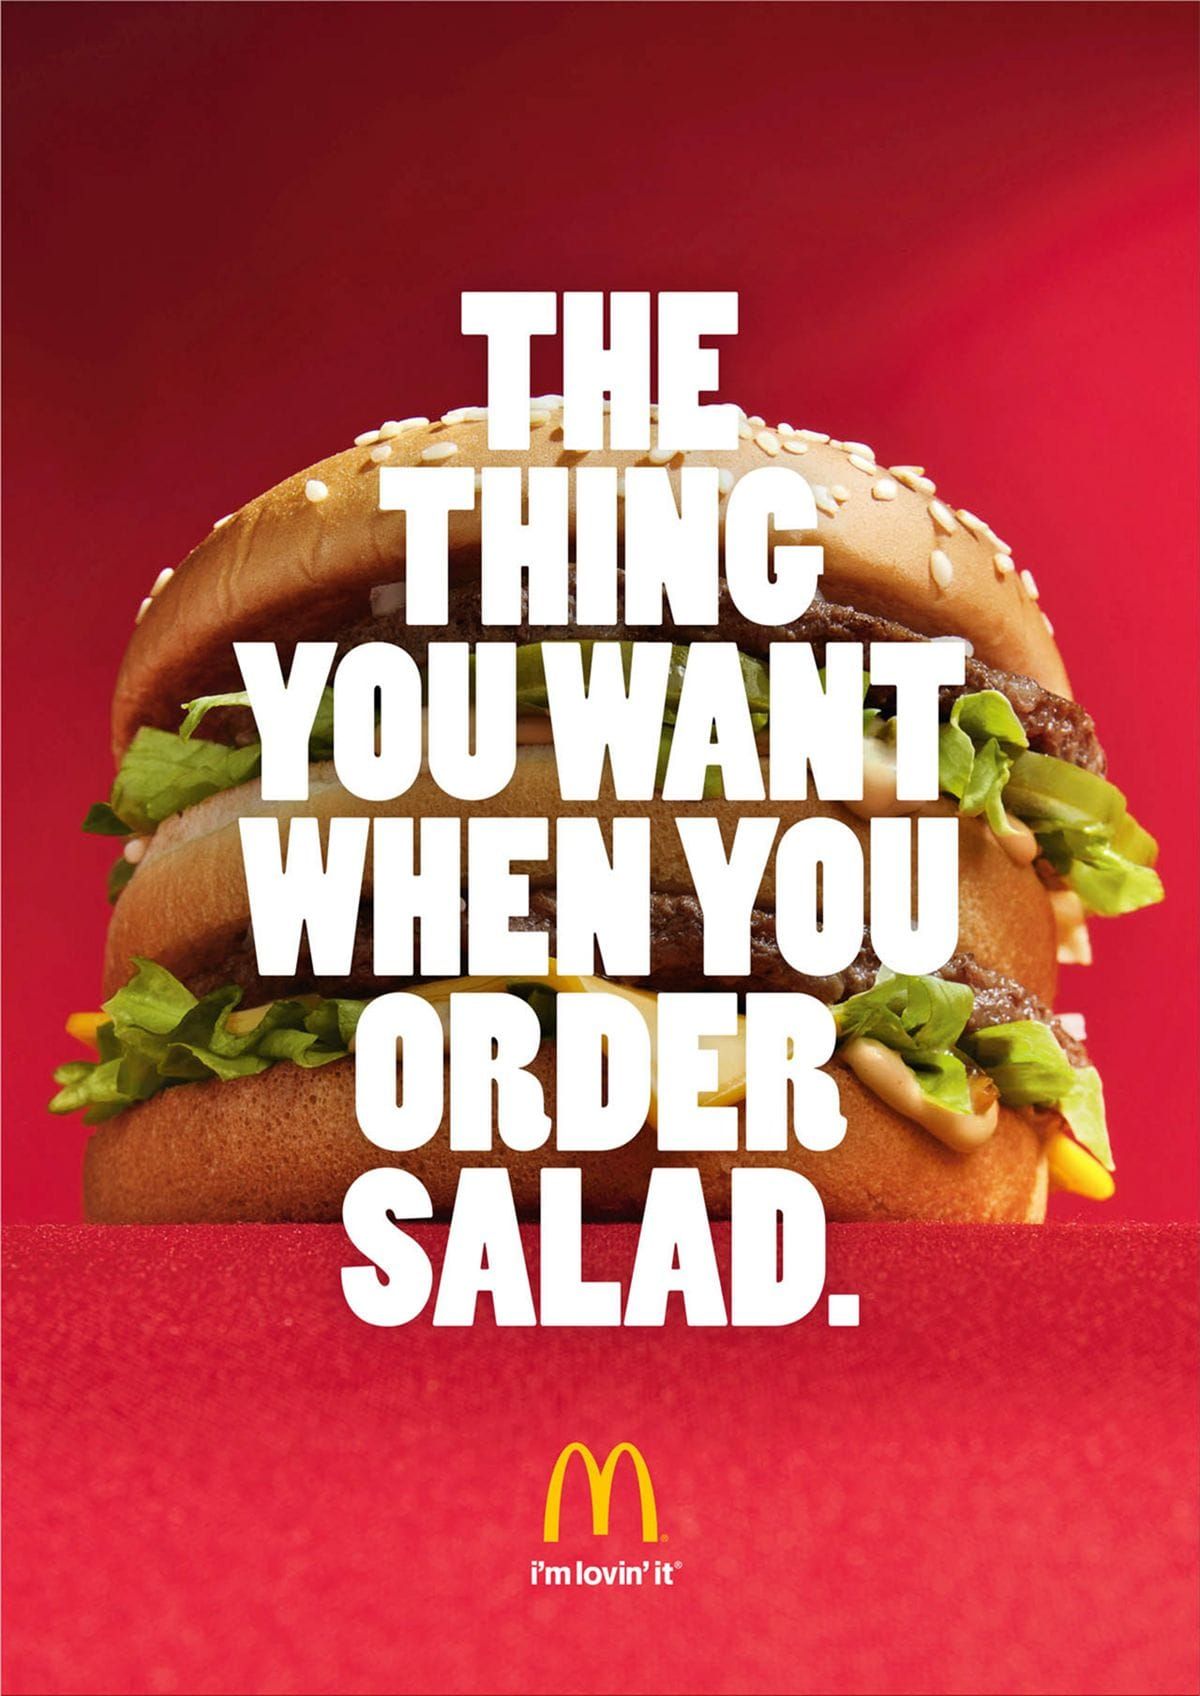 McDonald's: The thing you want|adRuby.com